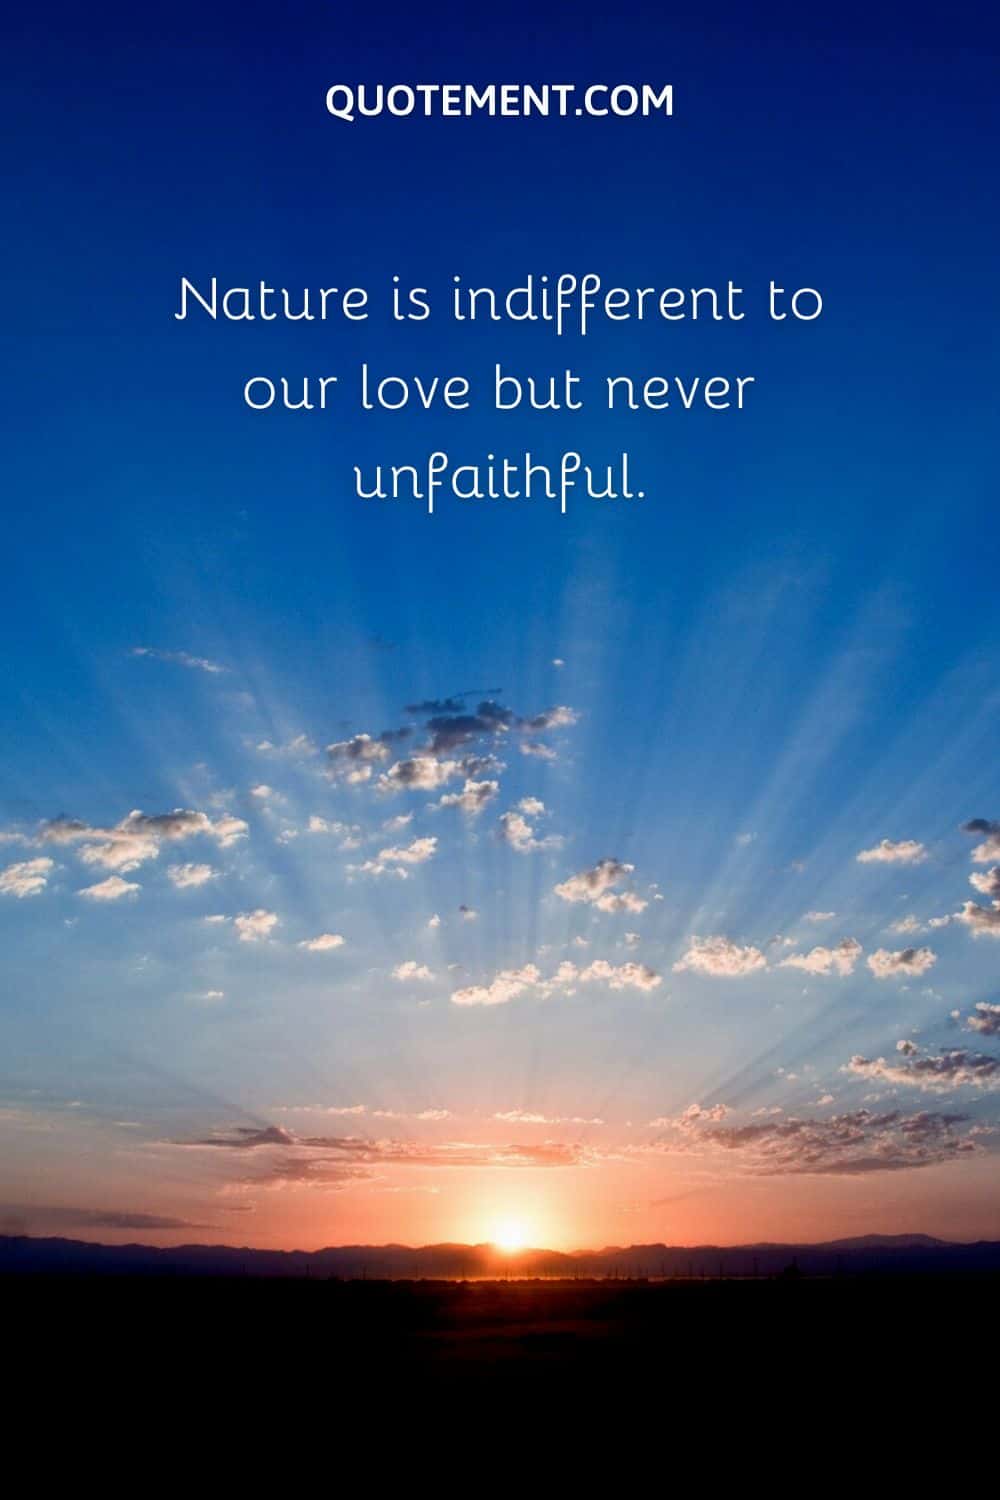 Nature is indifferent to our love but never unfaithful.